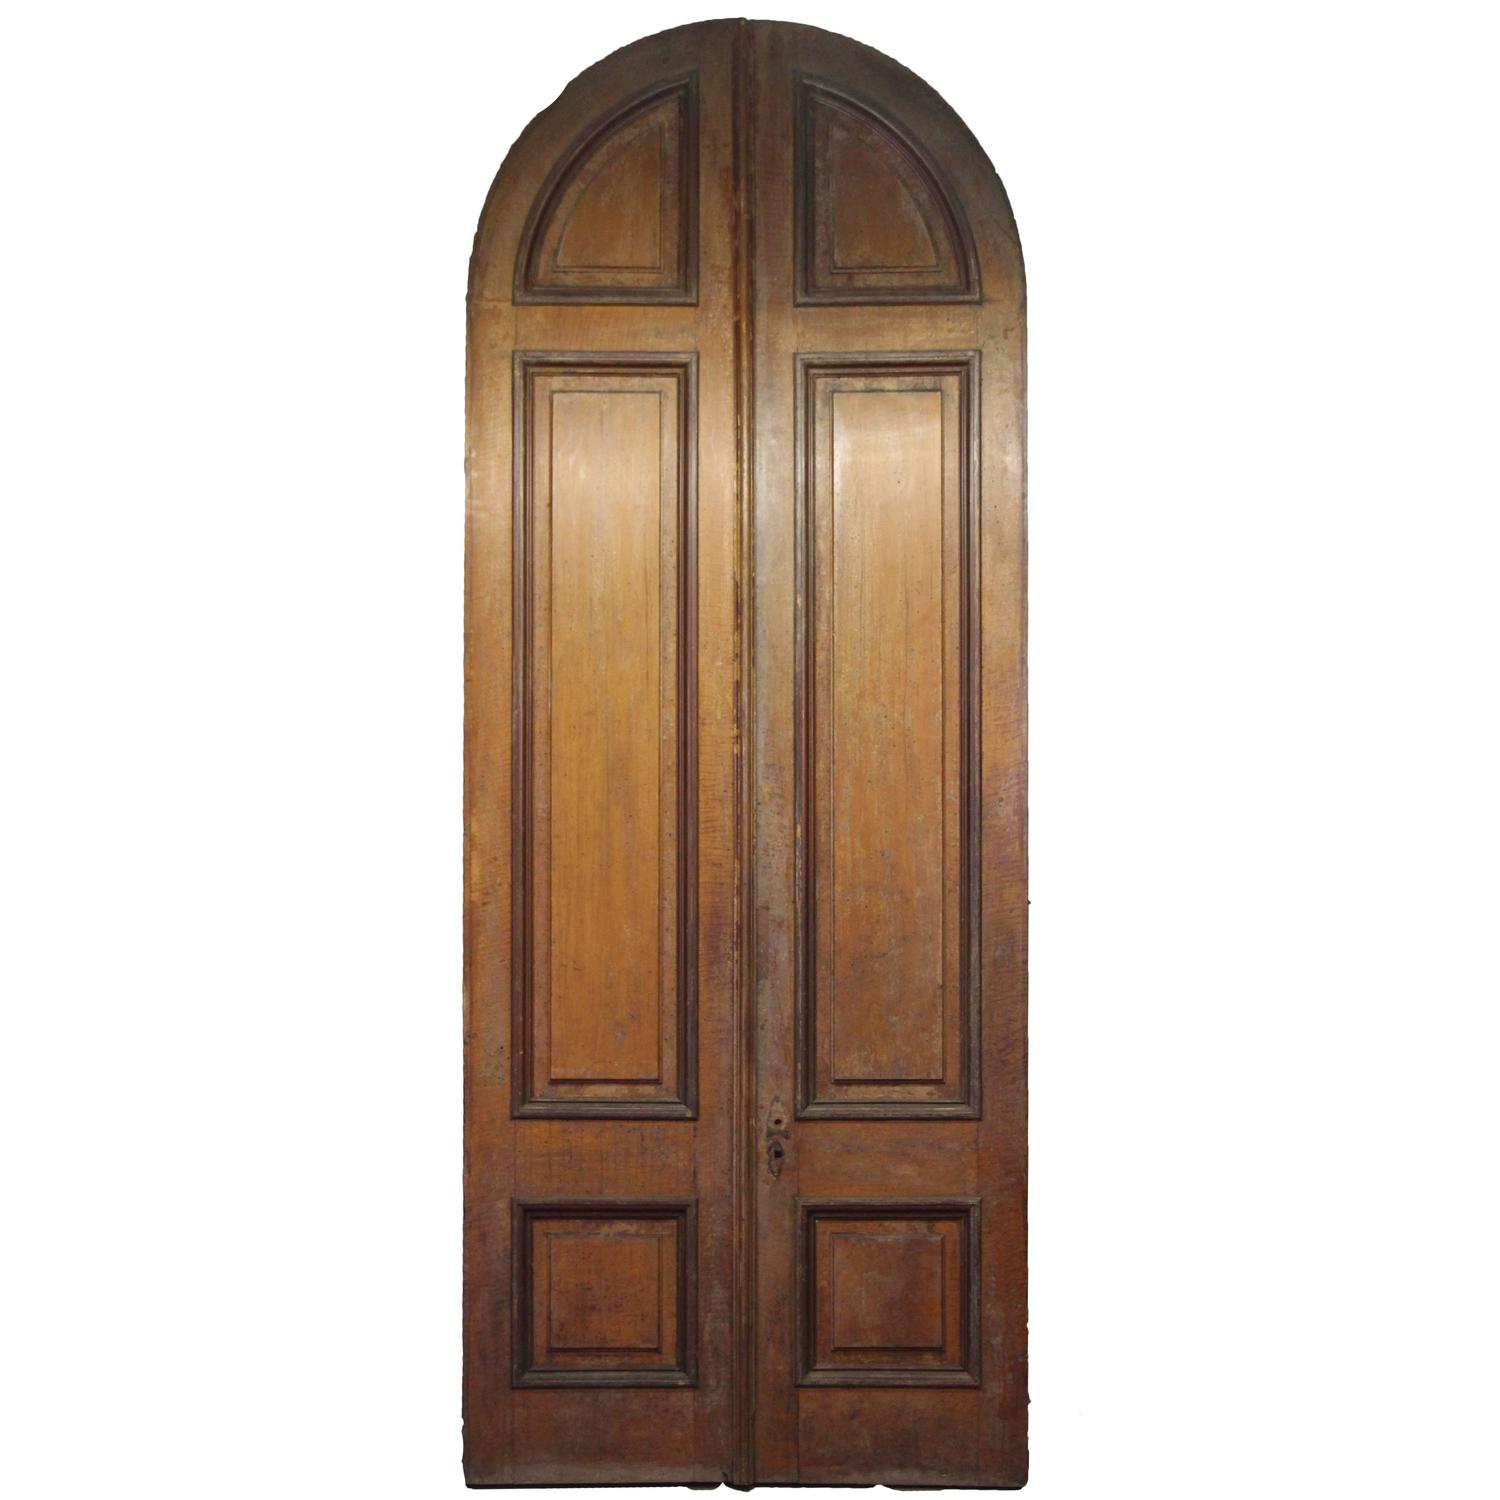 1876 Pair of Oversize Raised Panel Arched Entry Double Doors from ...